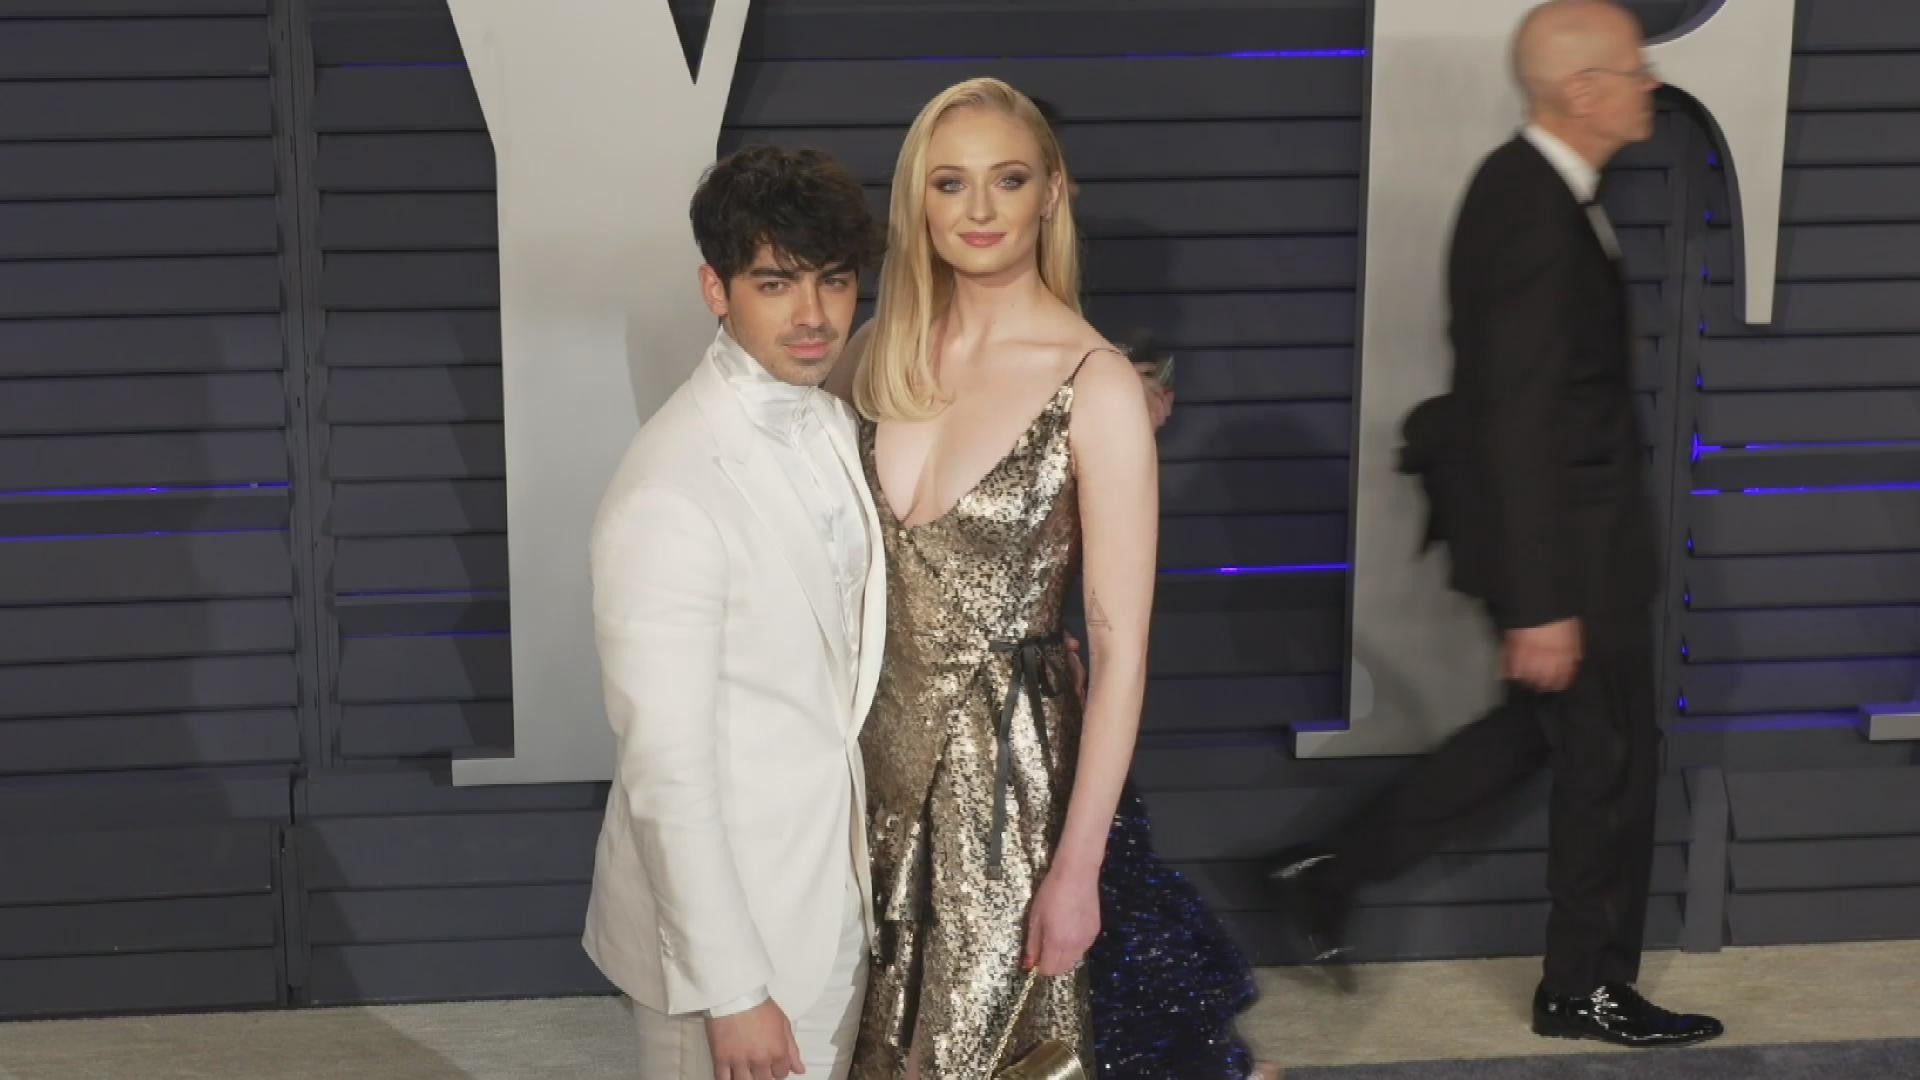 Met Gala 2019: Sophie Turner and Joe Jonas make first public appearance  since surprise wedding, The Independent